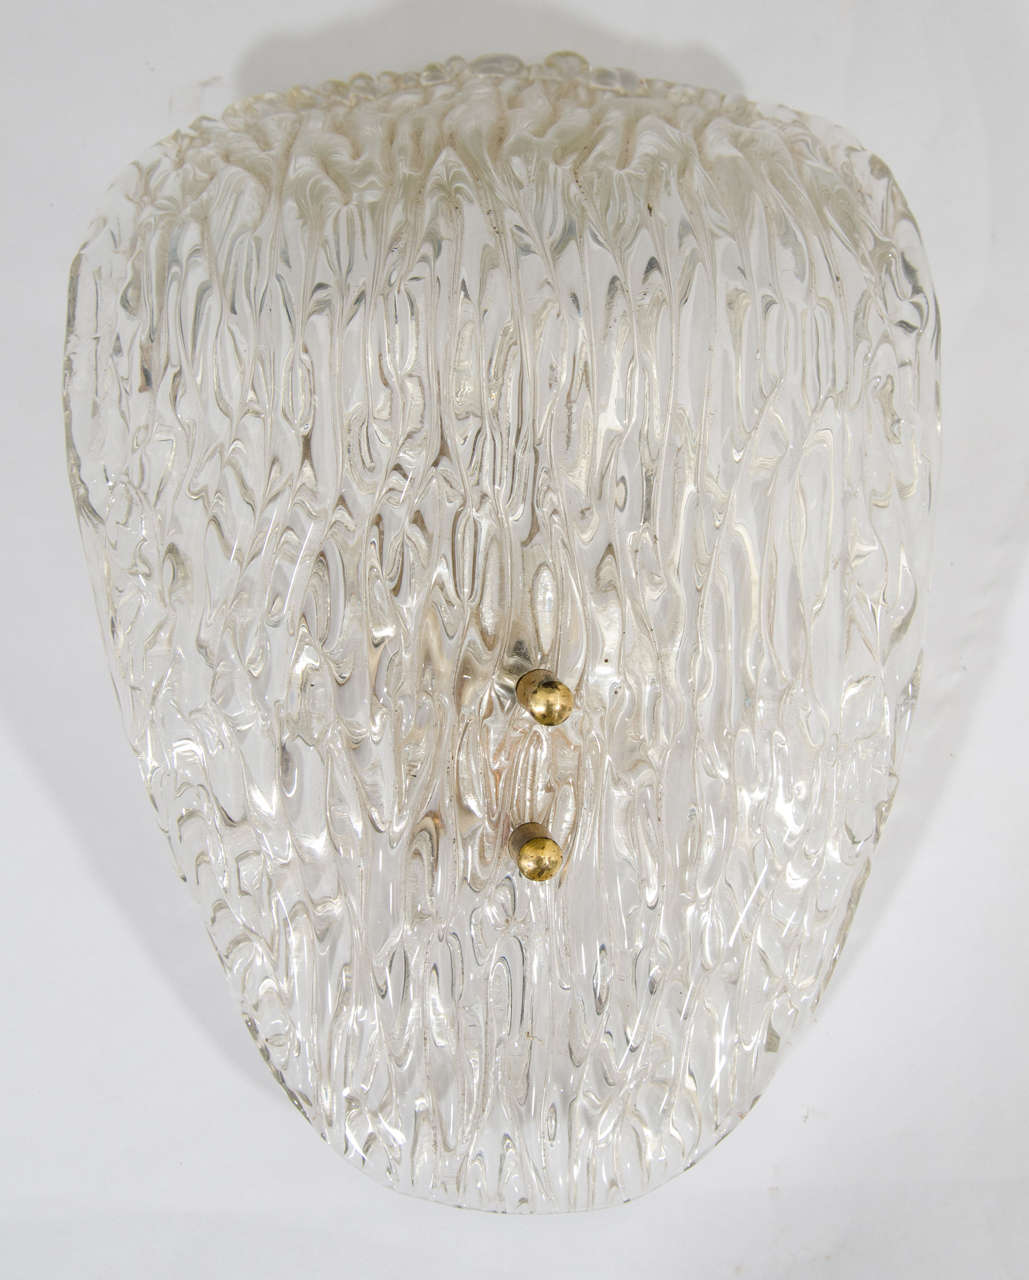 A clear translucent textured art glass wall sconce with brass hardware, Scandinavian Modern/Midcentury Modern period, by Carl Fagerlund for Orrefors, circa mid-20th century, Sweden. No chips noted. 
